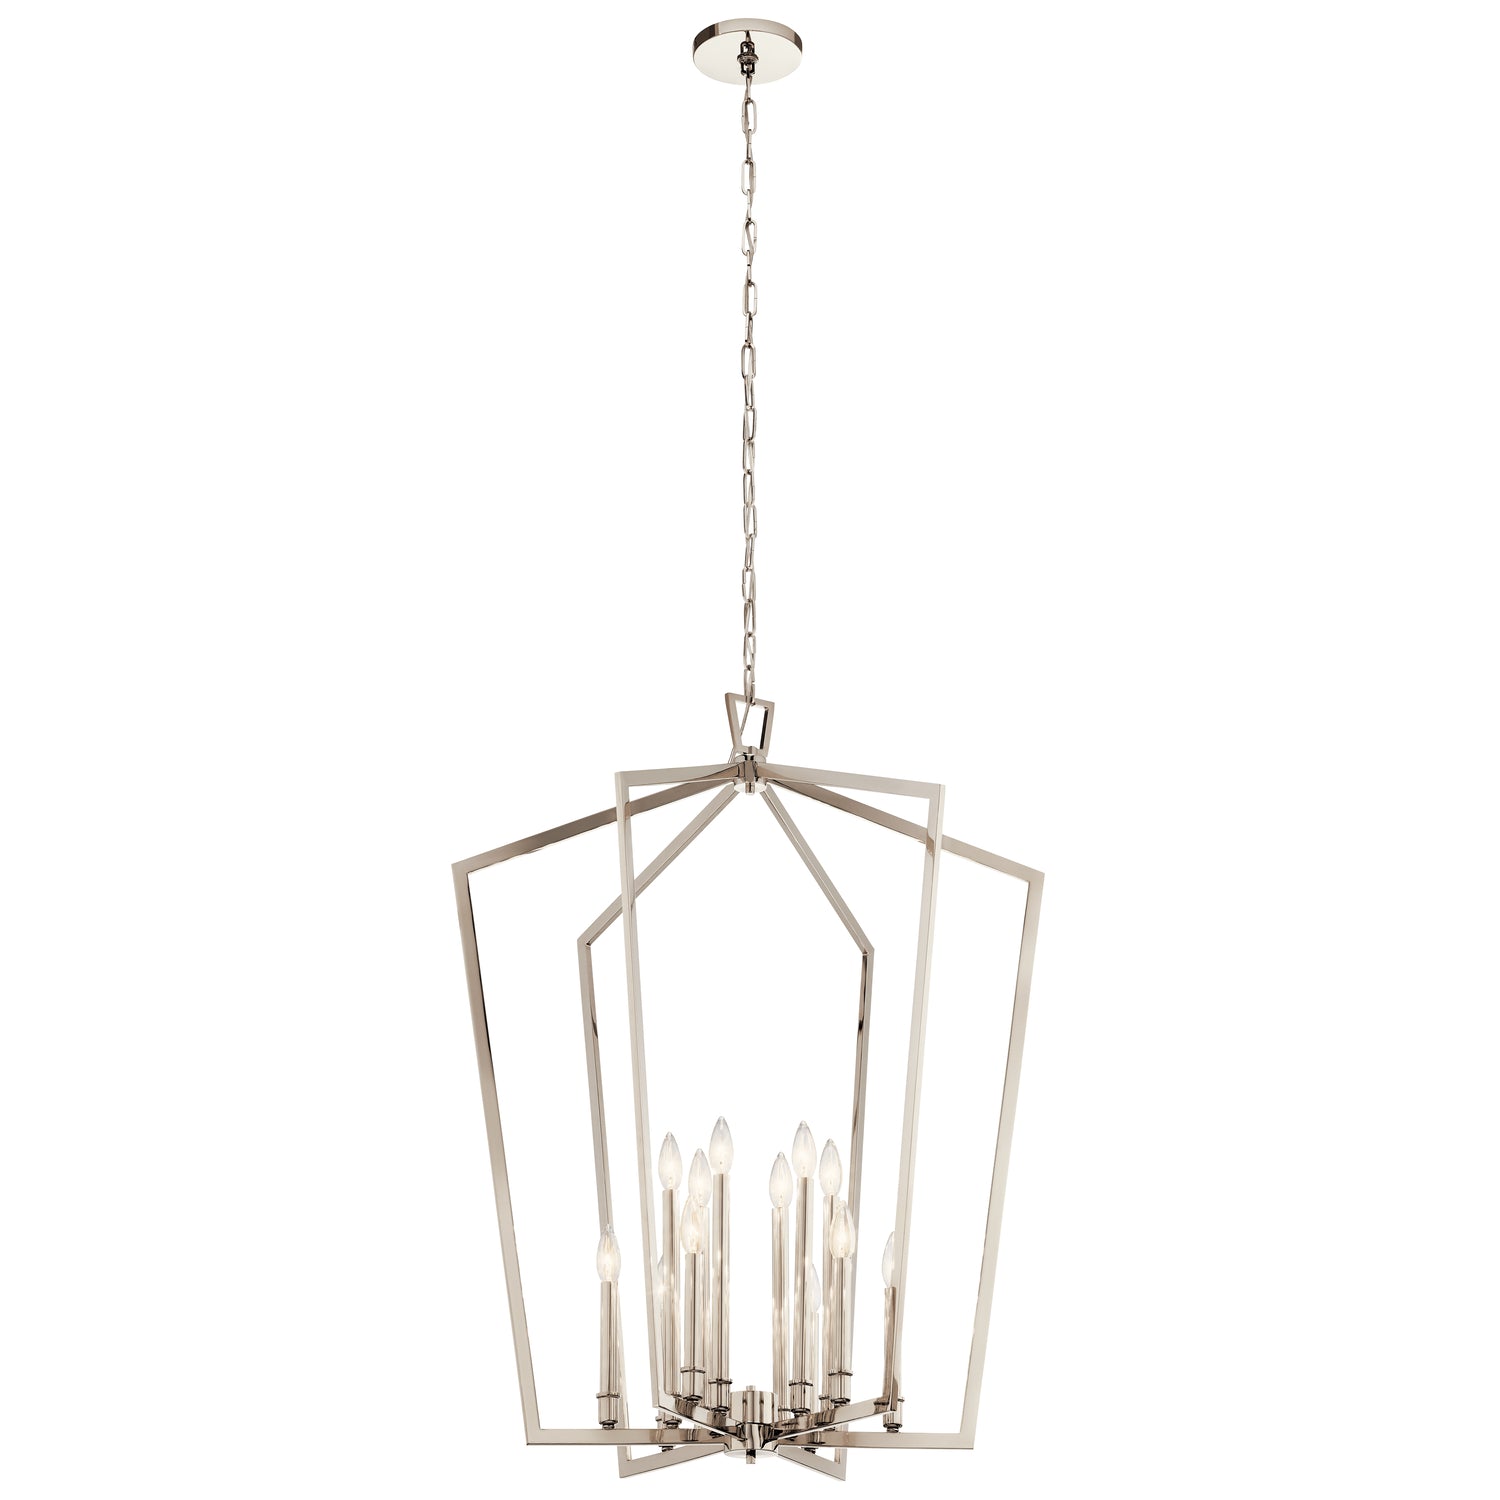 Abbotswell Chandelier Polished Nickel